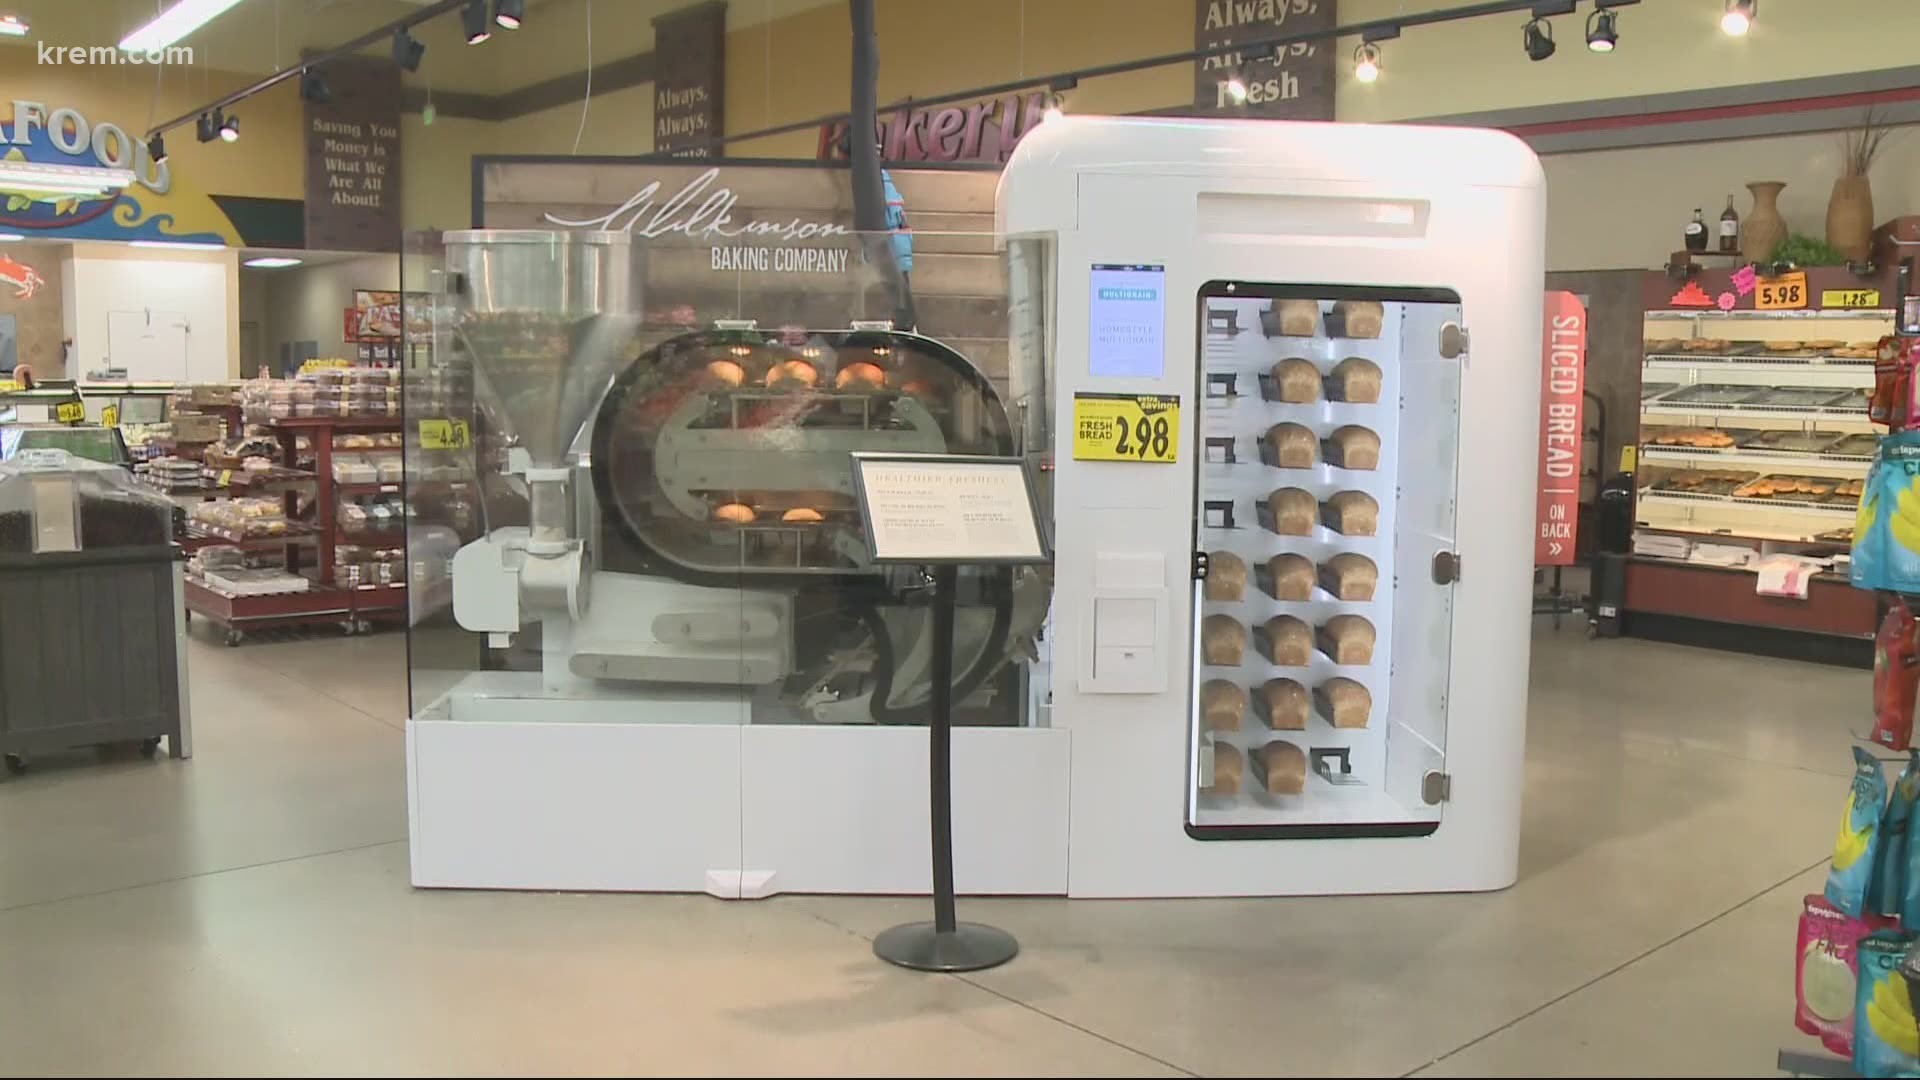 The machines from Wilkinson Baking Company makes fresh loaves of bread in full view of customers.